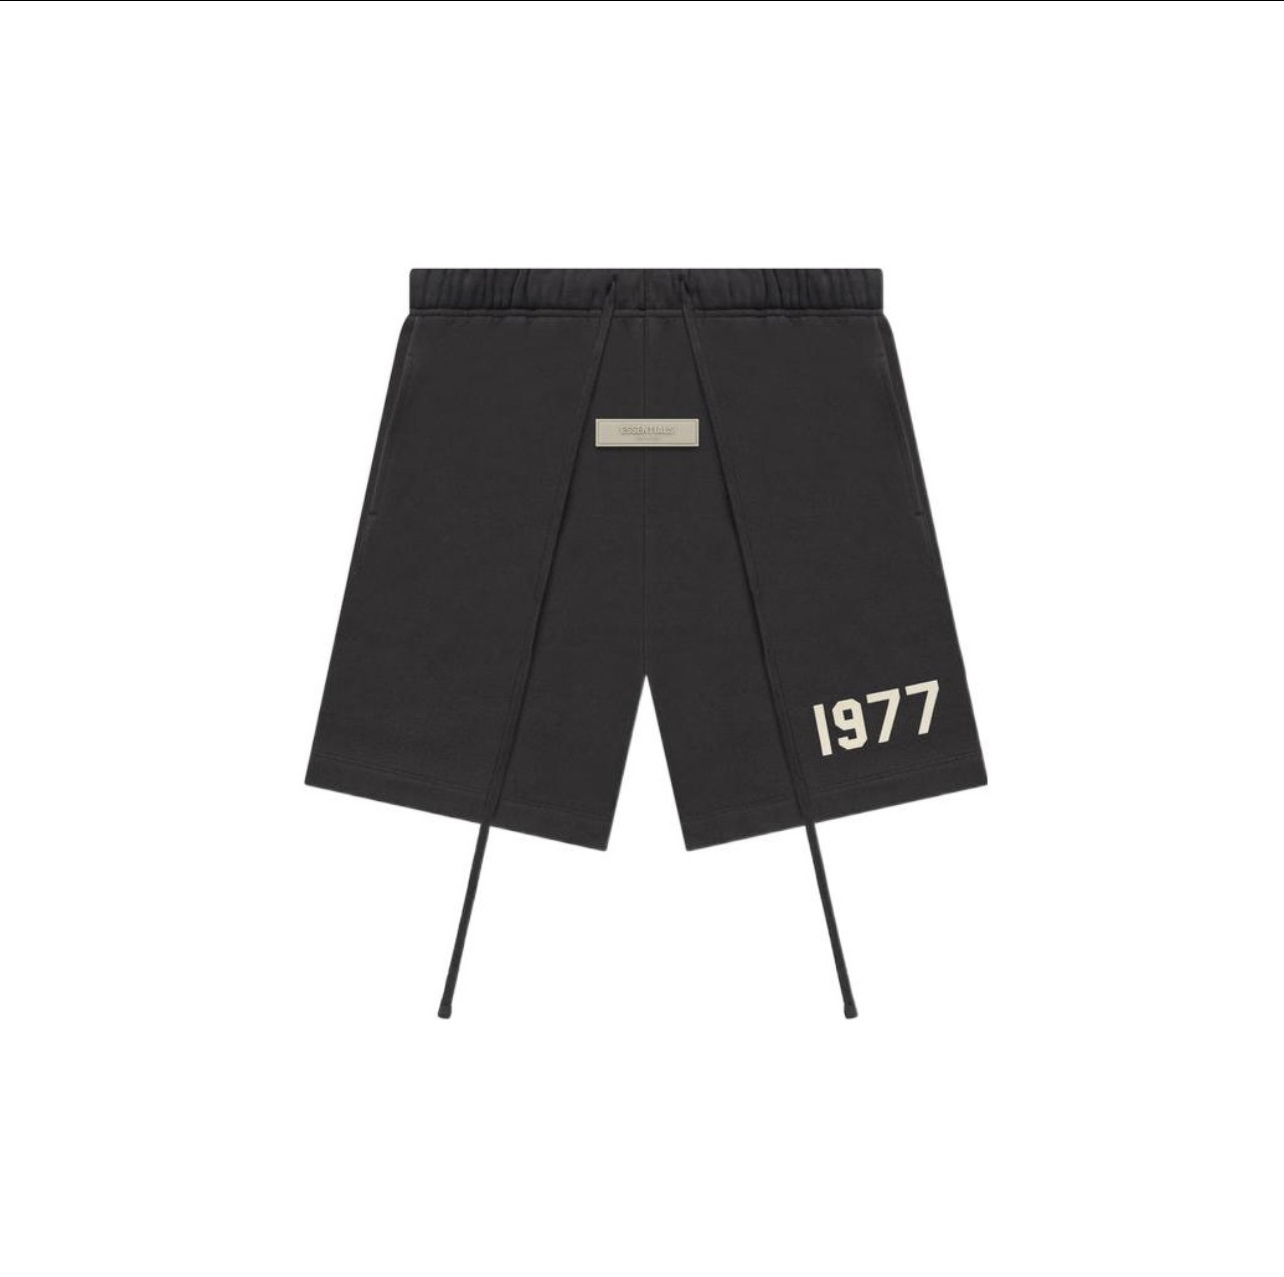 Essential Fear of God SS23 1977 Iron Short